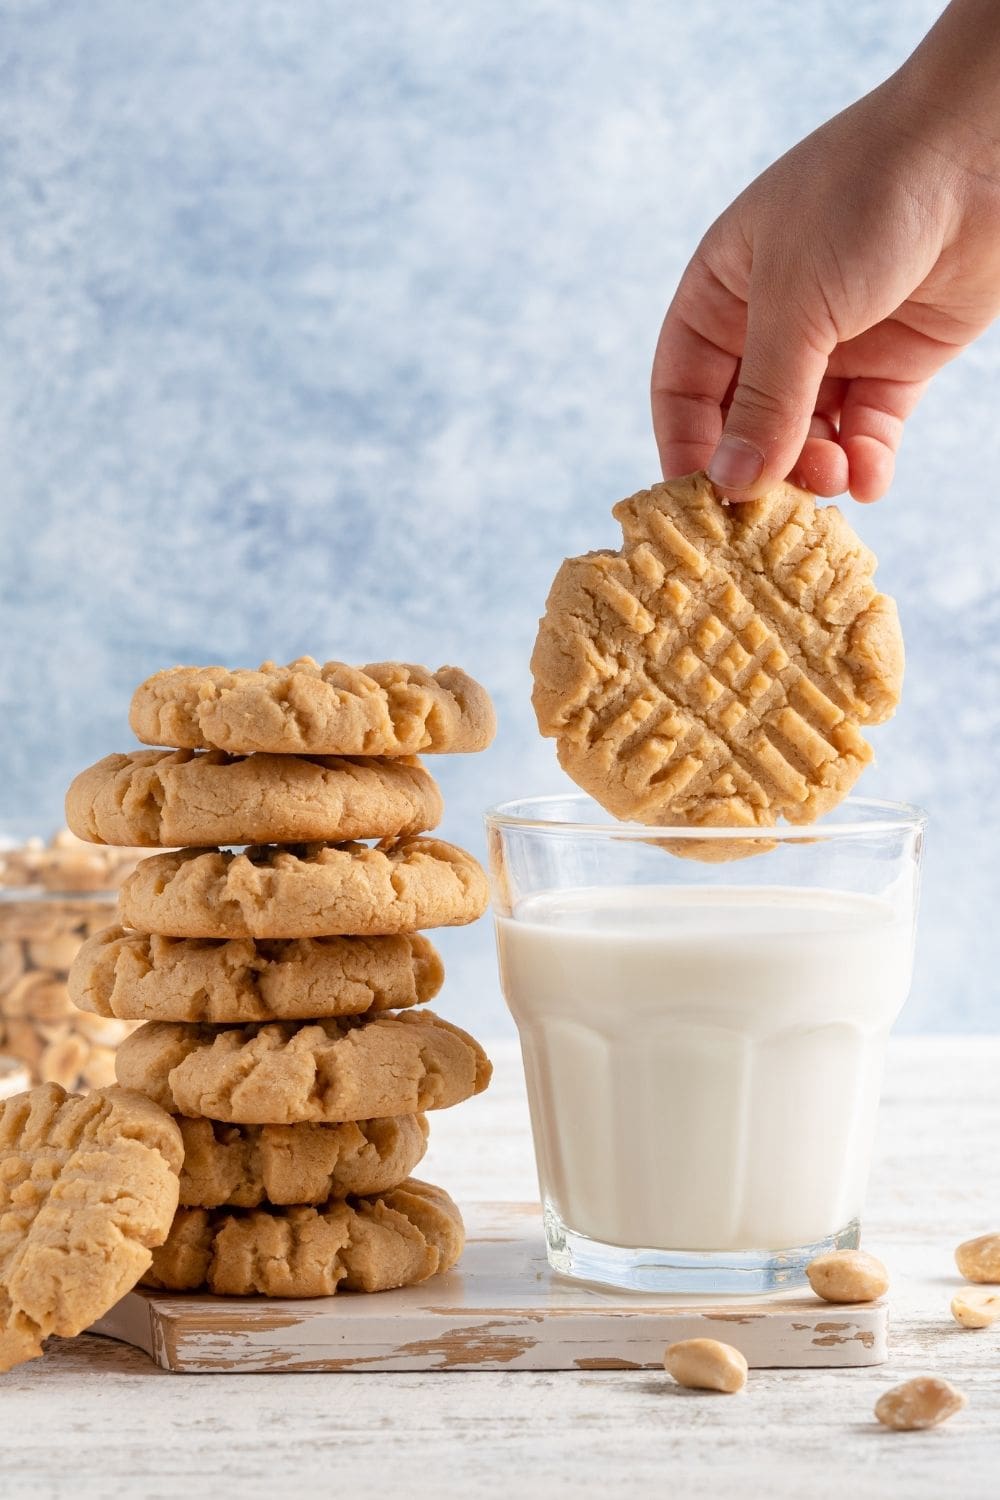 Peanut Butter Cookies and a Glass of Milk